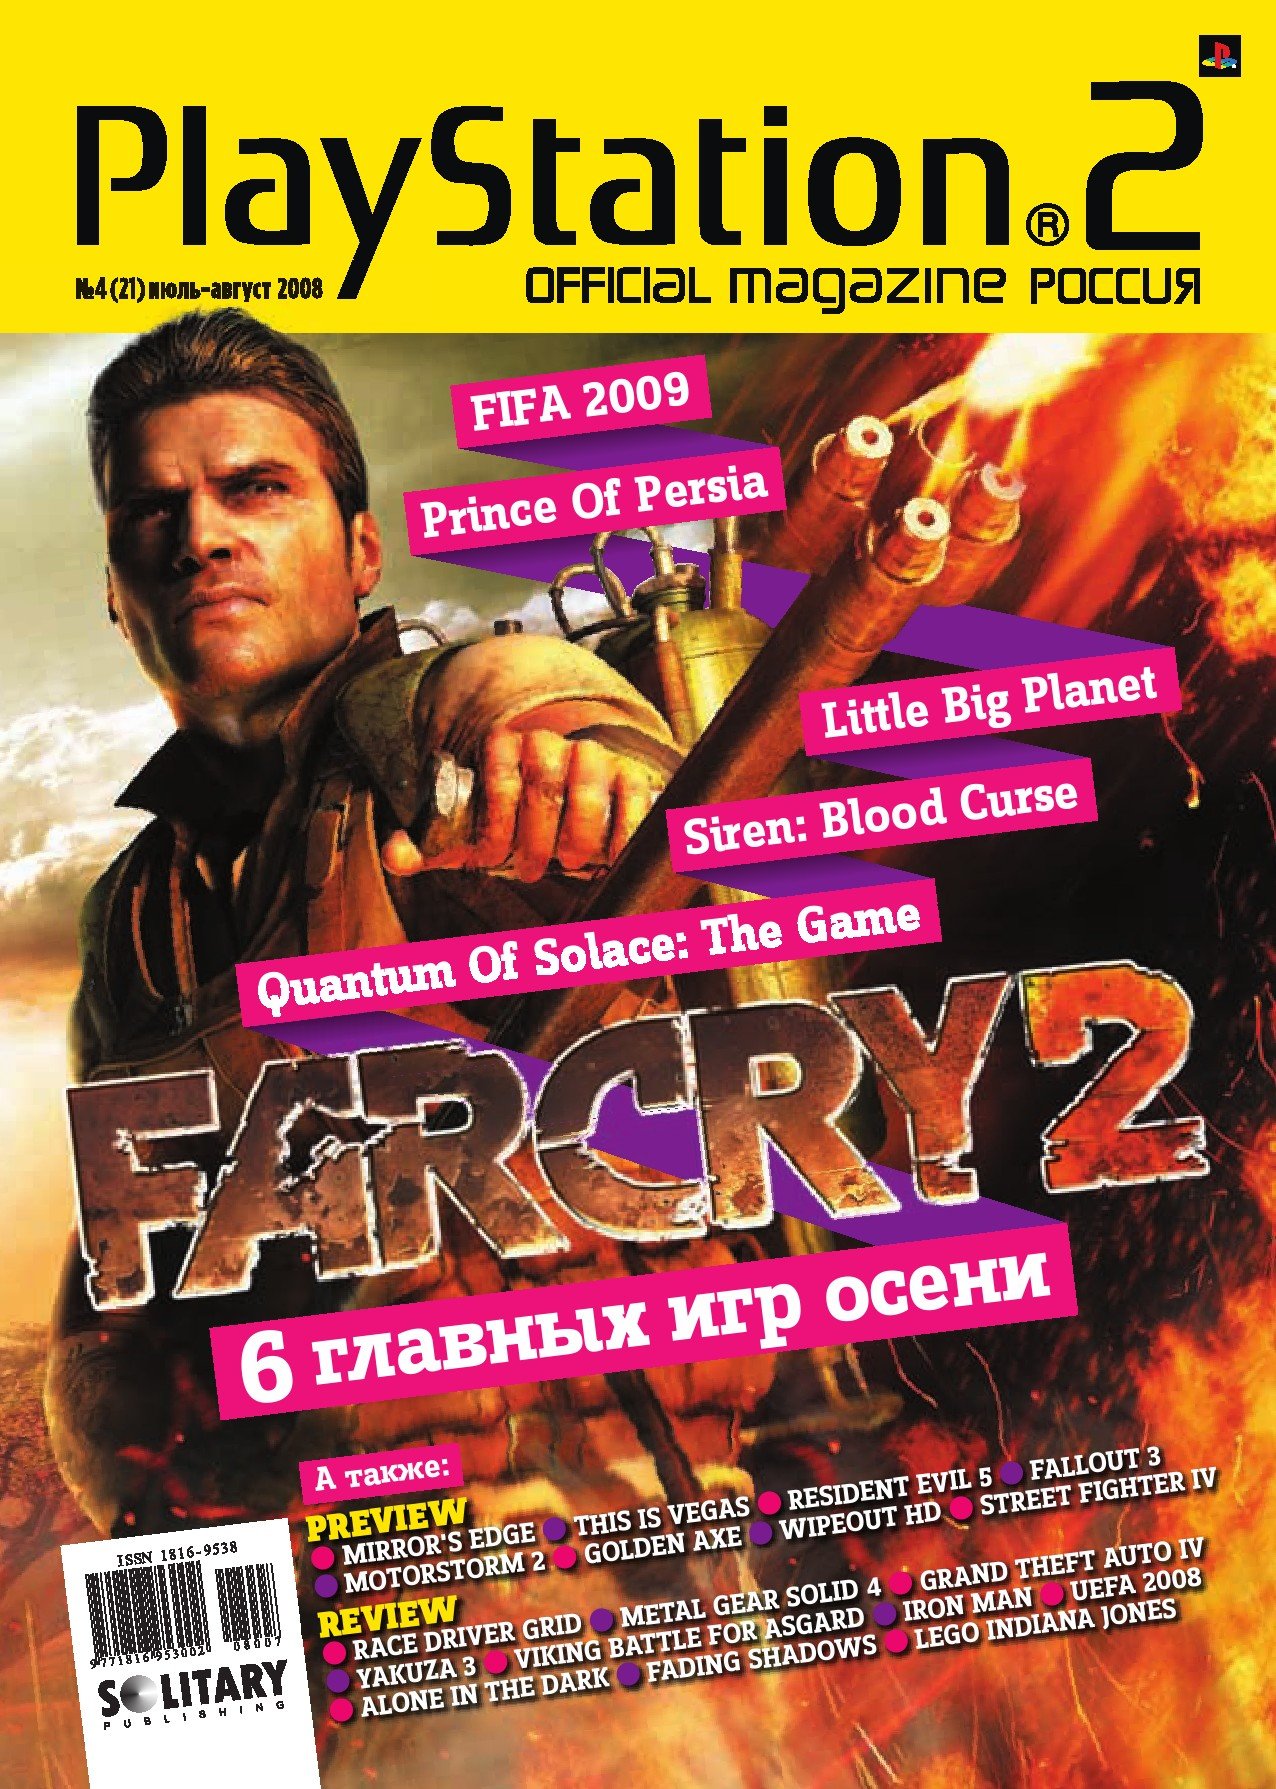 Playstation 2 Official Magazine (Russia) Issue 21 - Jul./Aug. '08